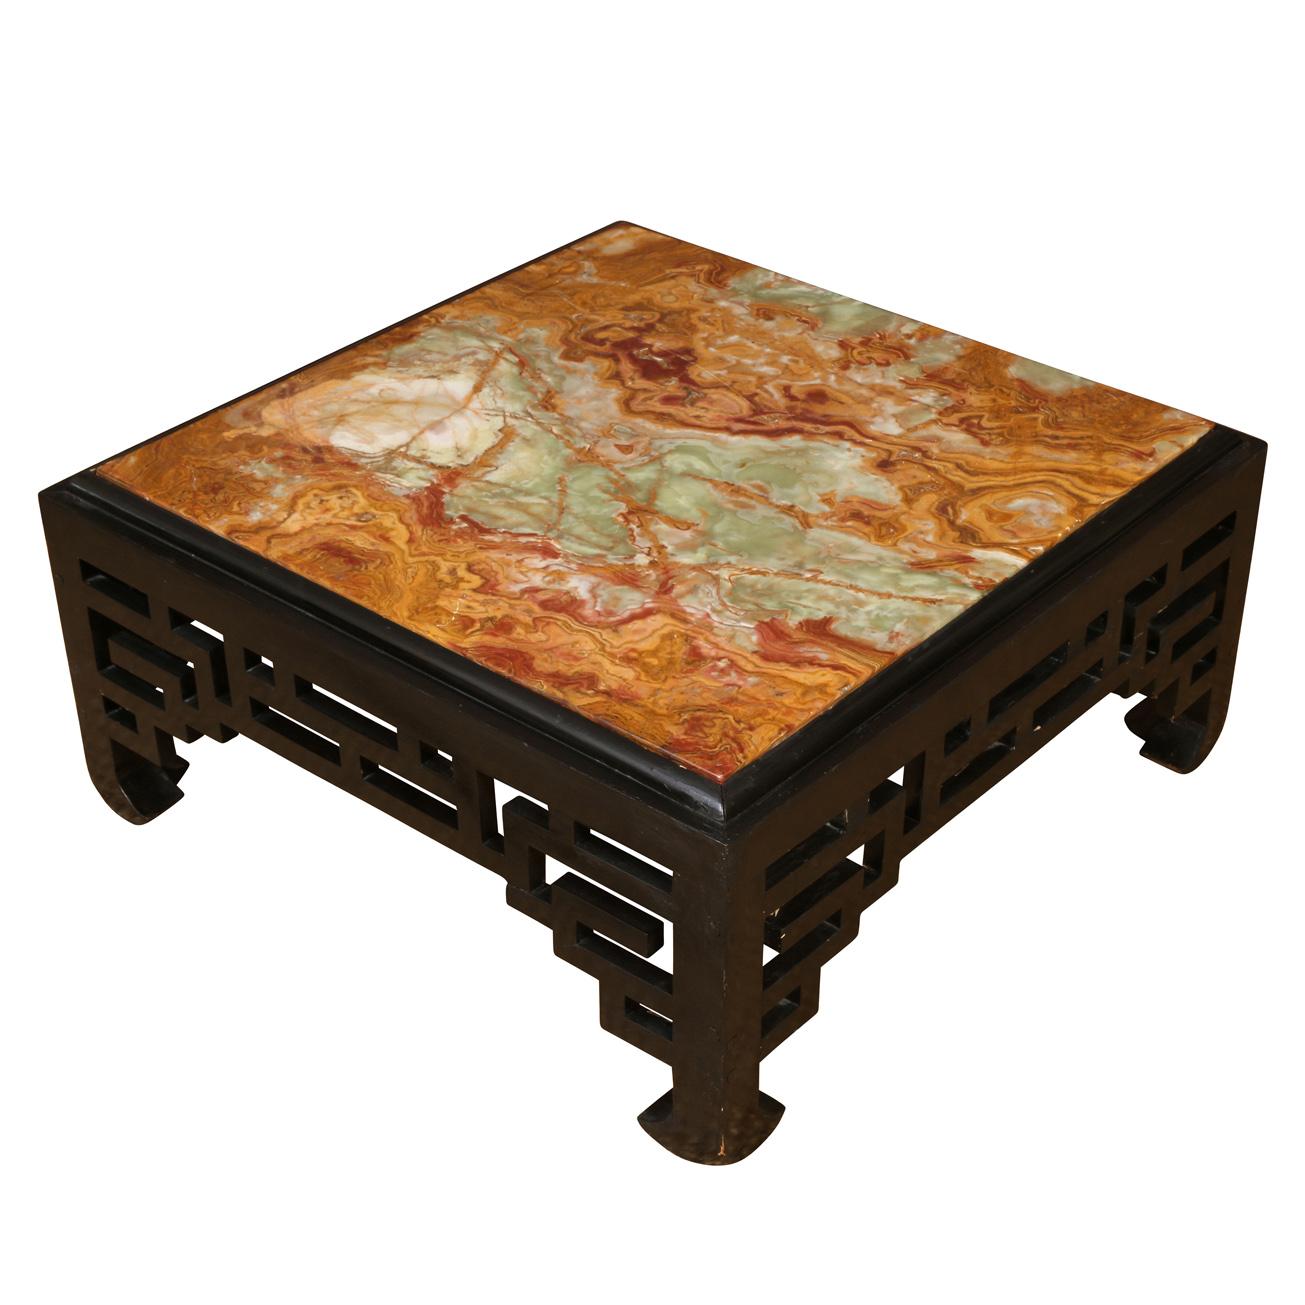 A vintage Asian square coffee table with a black lacquer fretwork base and a multicolored onyx stone top.